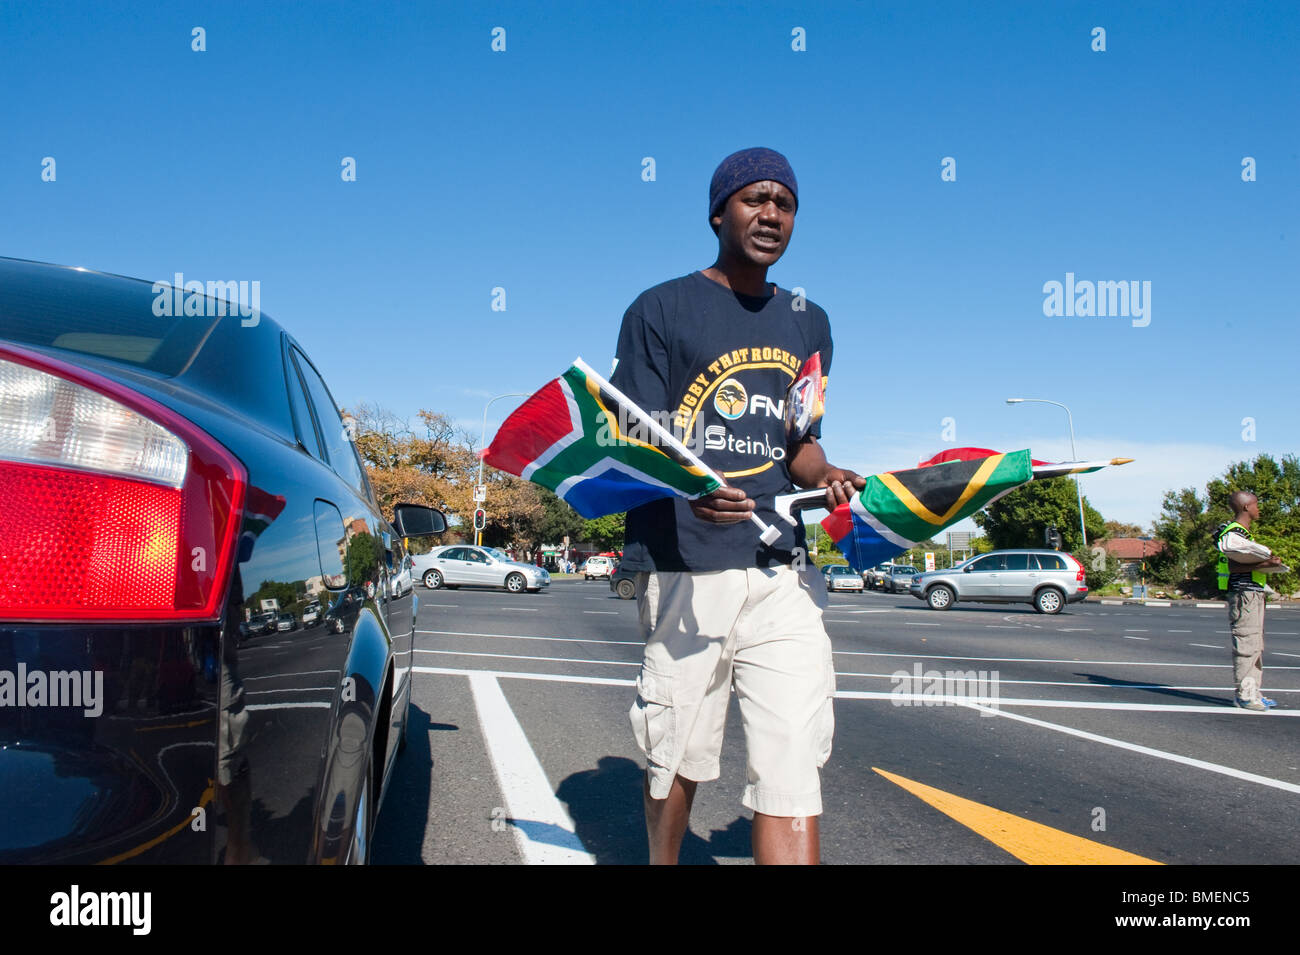 Street vendor sells south african flags in the run-up to the FIFA World Cup 2010 Cape Town South Africa Stock Photo